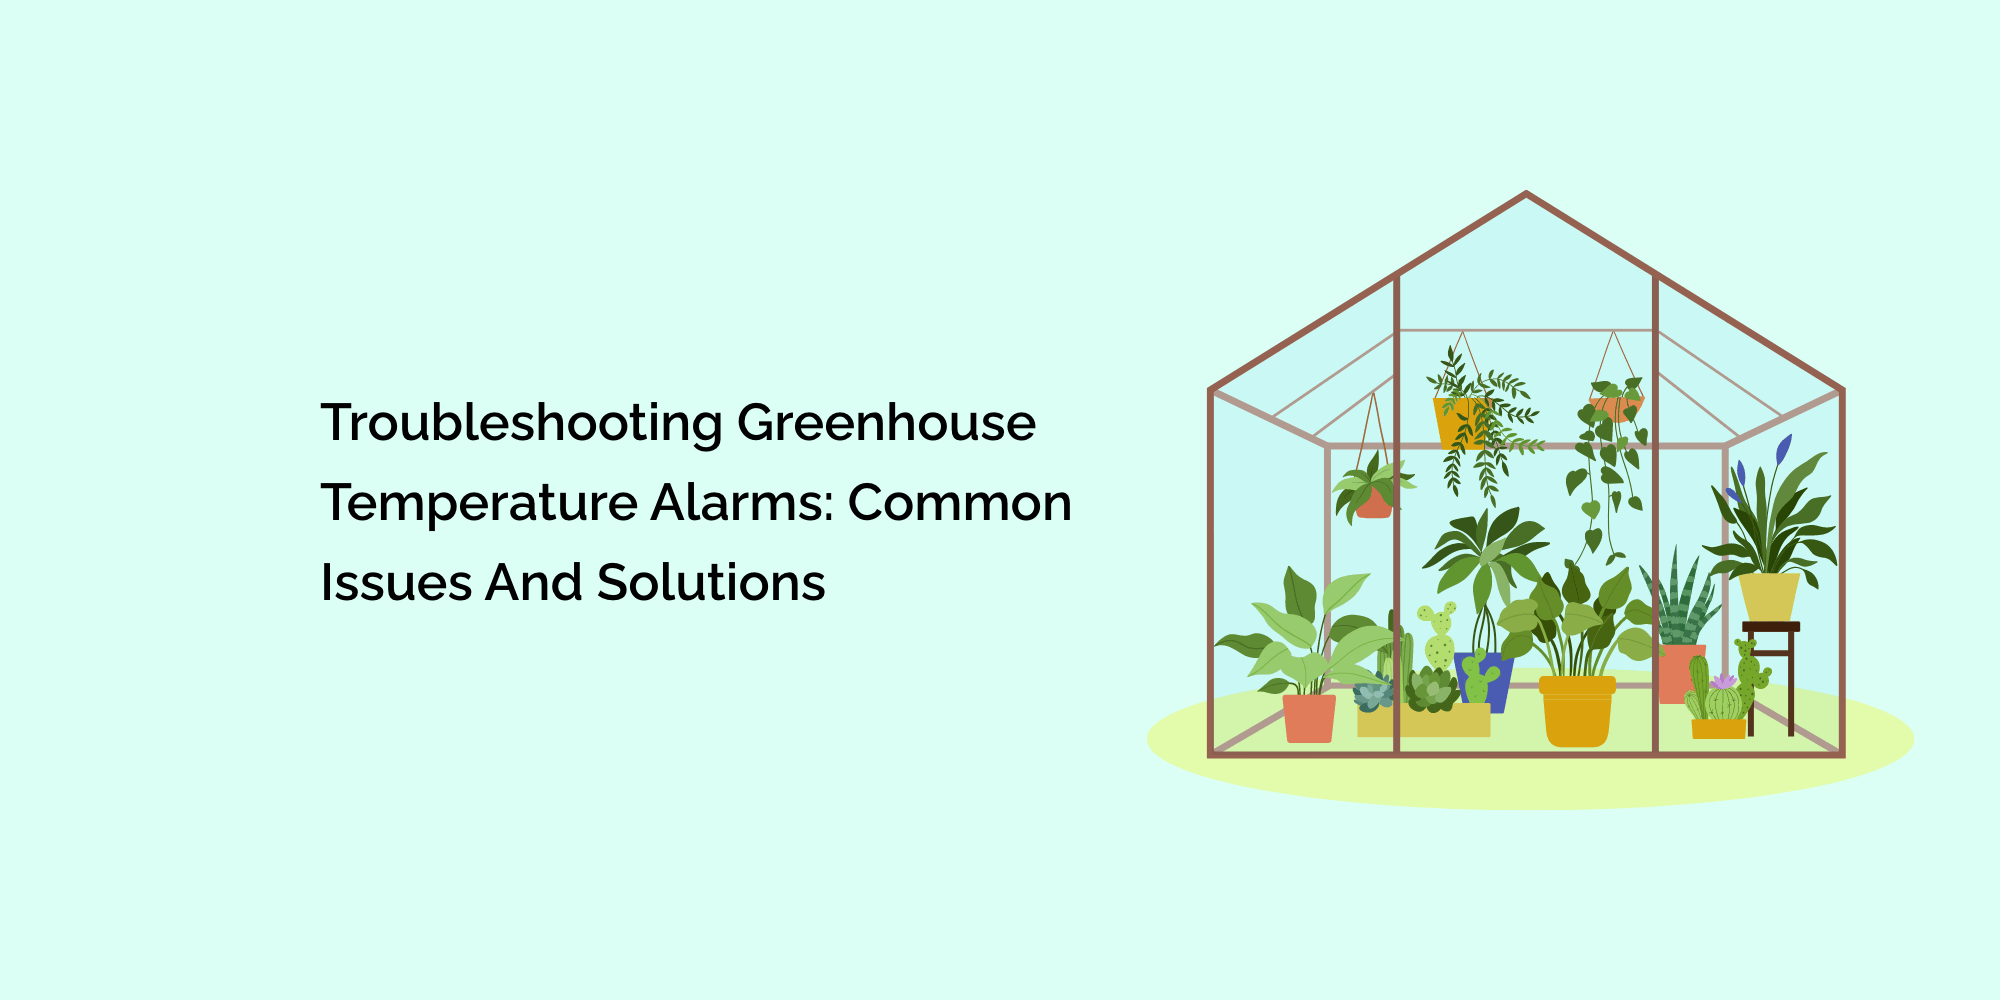 Troubleshooting Greenhouse Temperature Alarms: Common Issues and Solutions